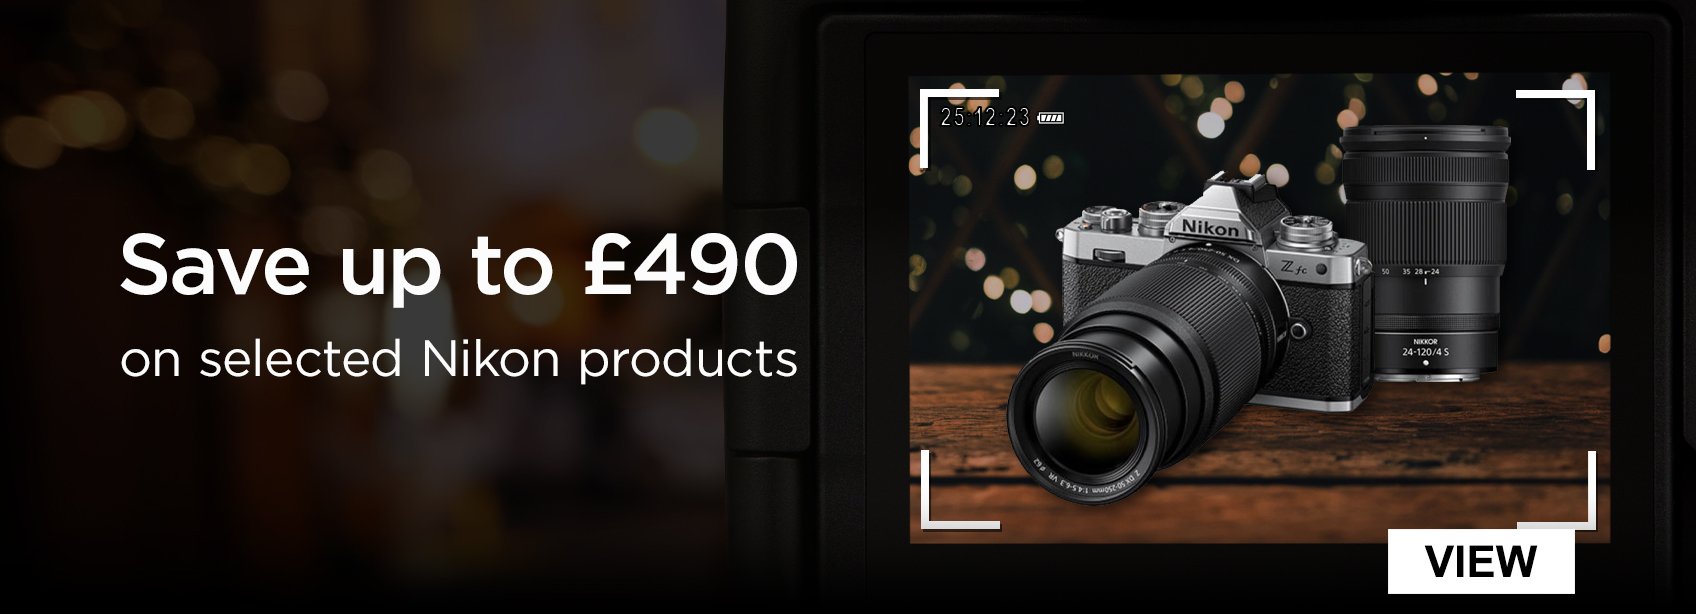 Save up to £490 on selected Nikon products